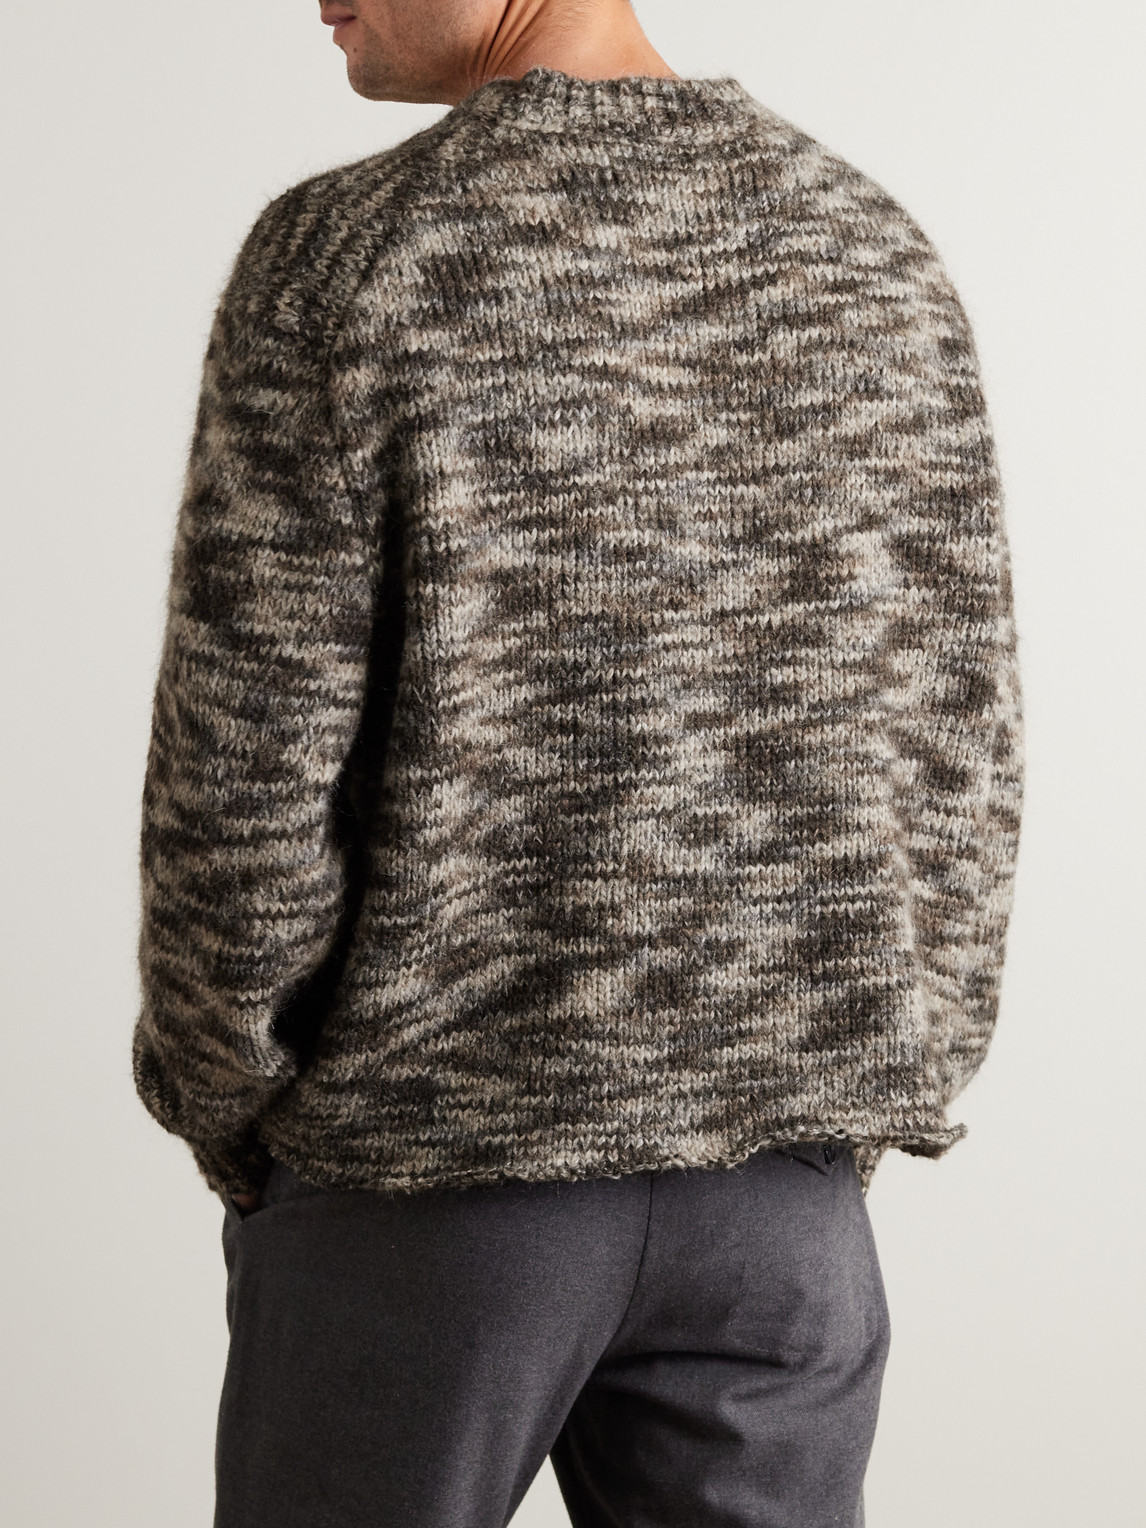 Shop Frame Knitted Sweater In Brown